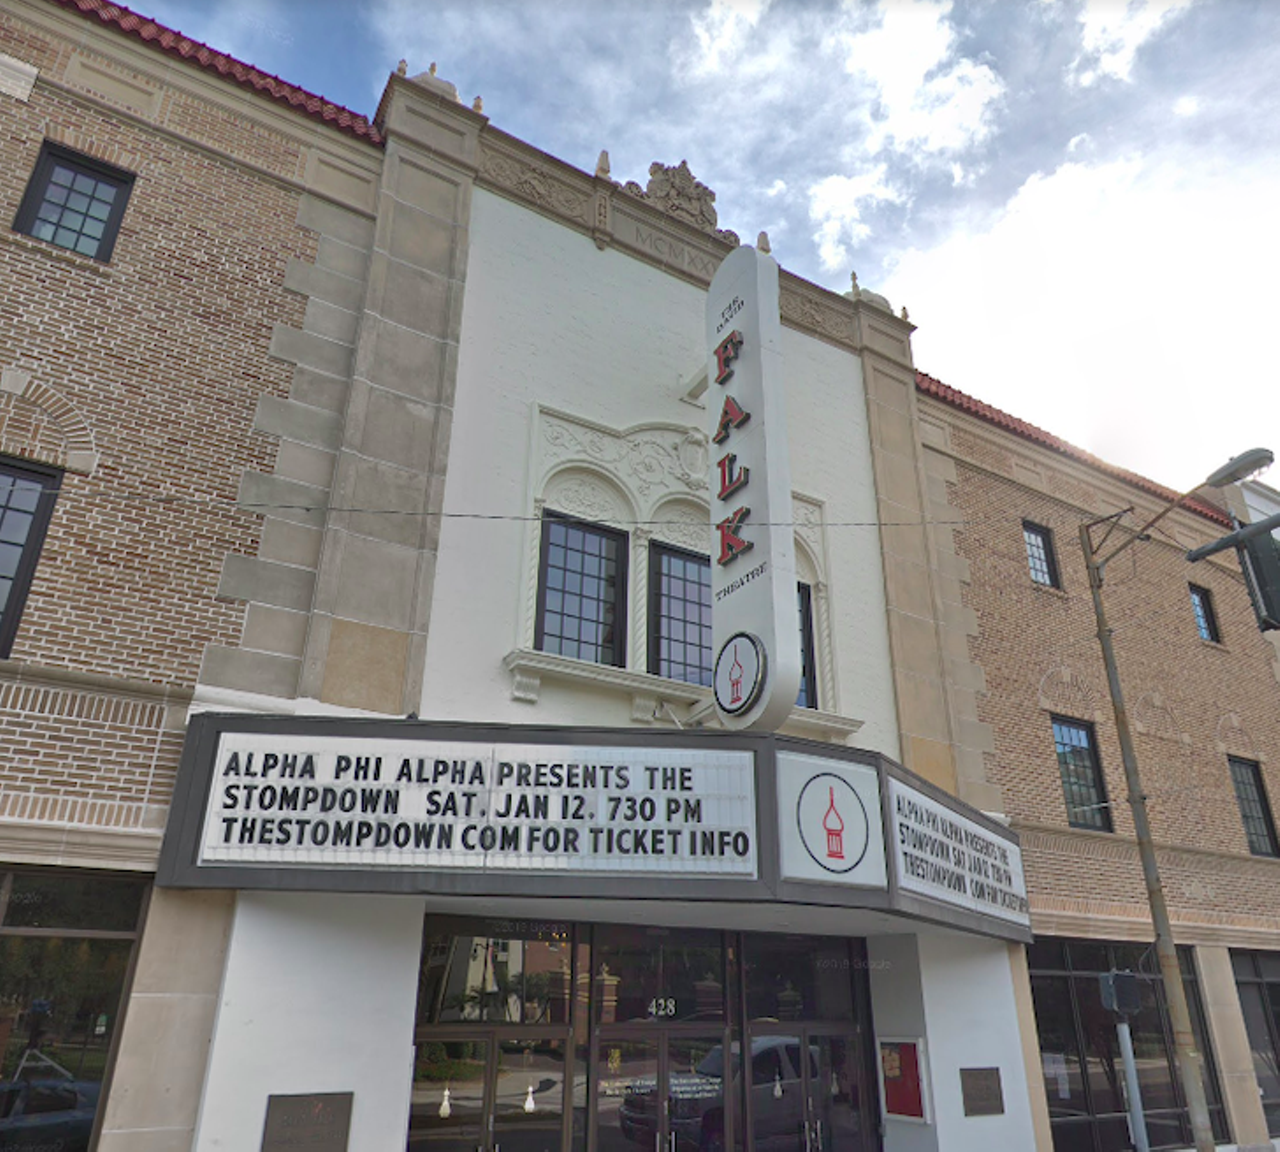 David Falk Theatre
428 W. Kennedy Blvd., Tampa, FL
What used to be Park Theatre, is now a stage at the University of Tampa. Reportedly, an actress by the name of Bessie Snavely hung herself in a third-floor dressing room, and is still roaming the theater to this day. 
Photo via Google Maps